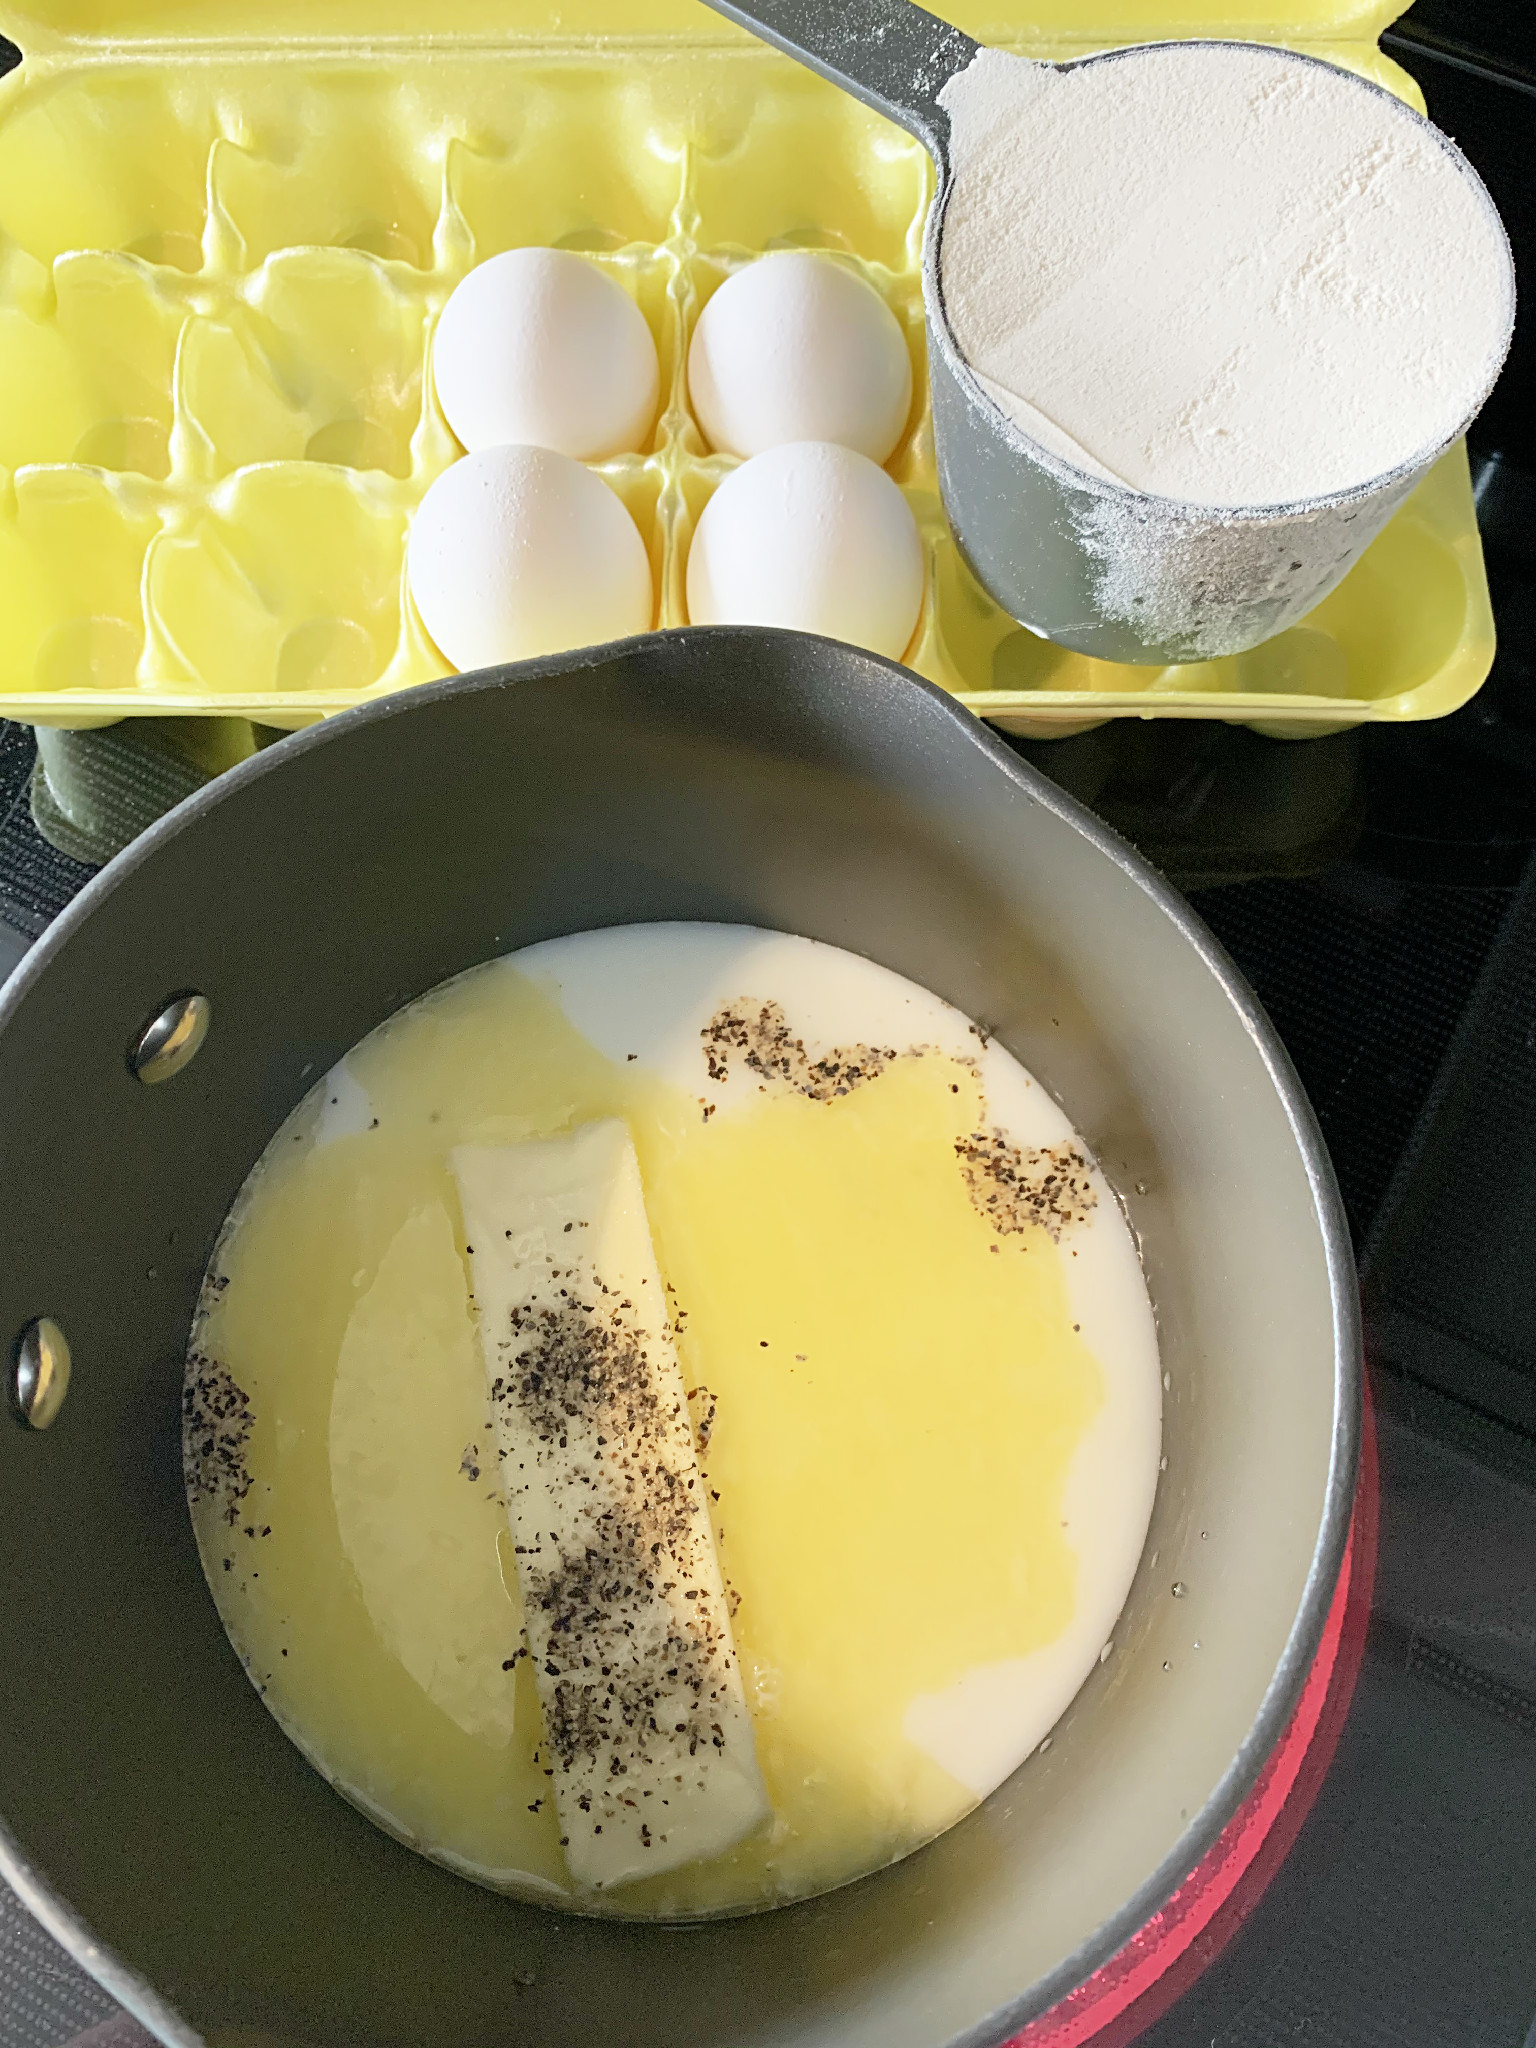 stovetop picture with eggs, flour, butter, milk